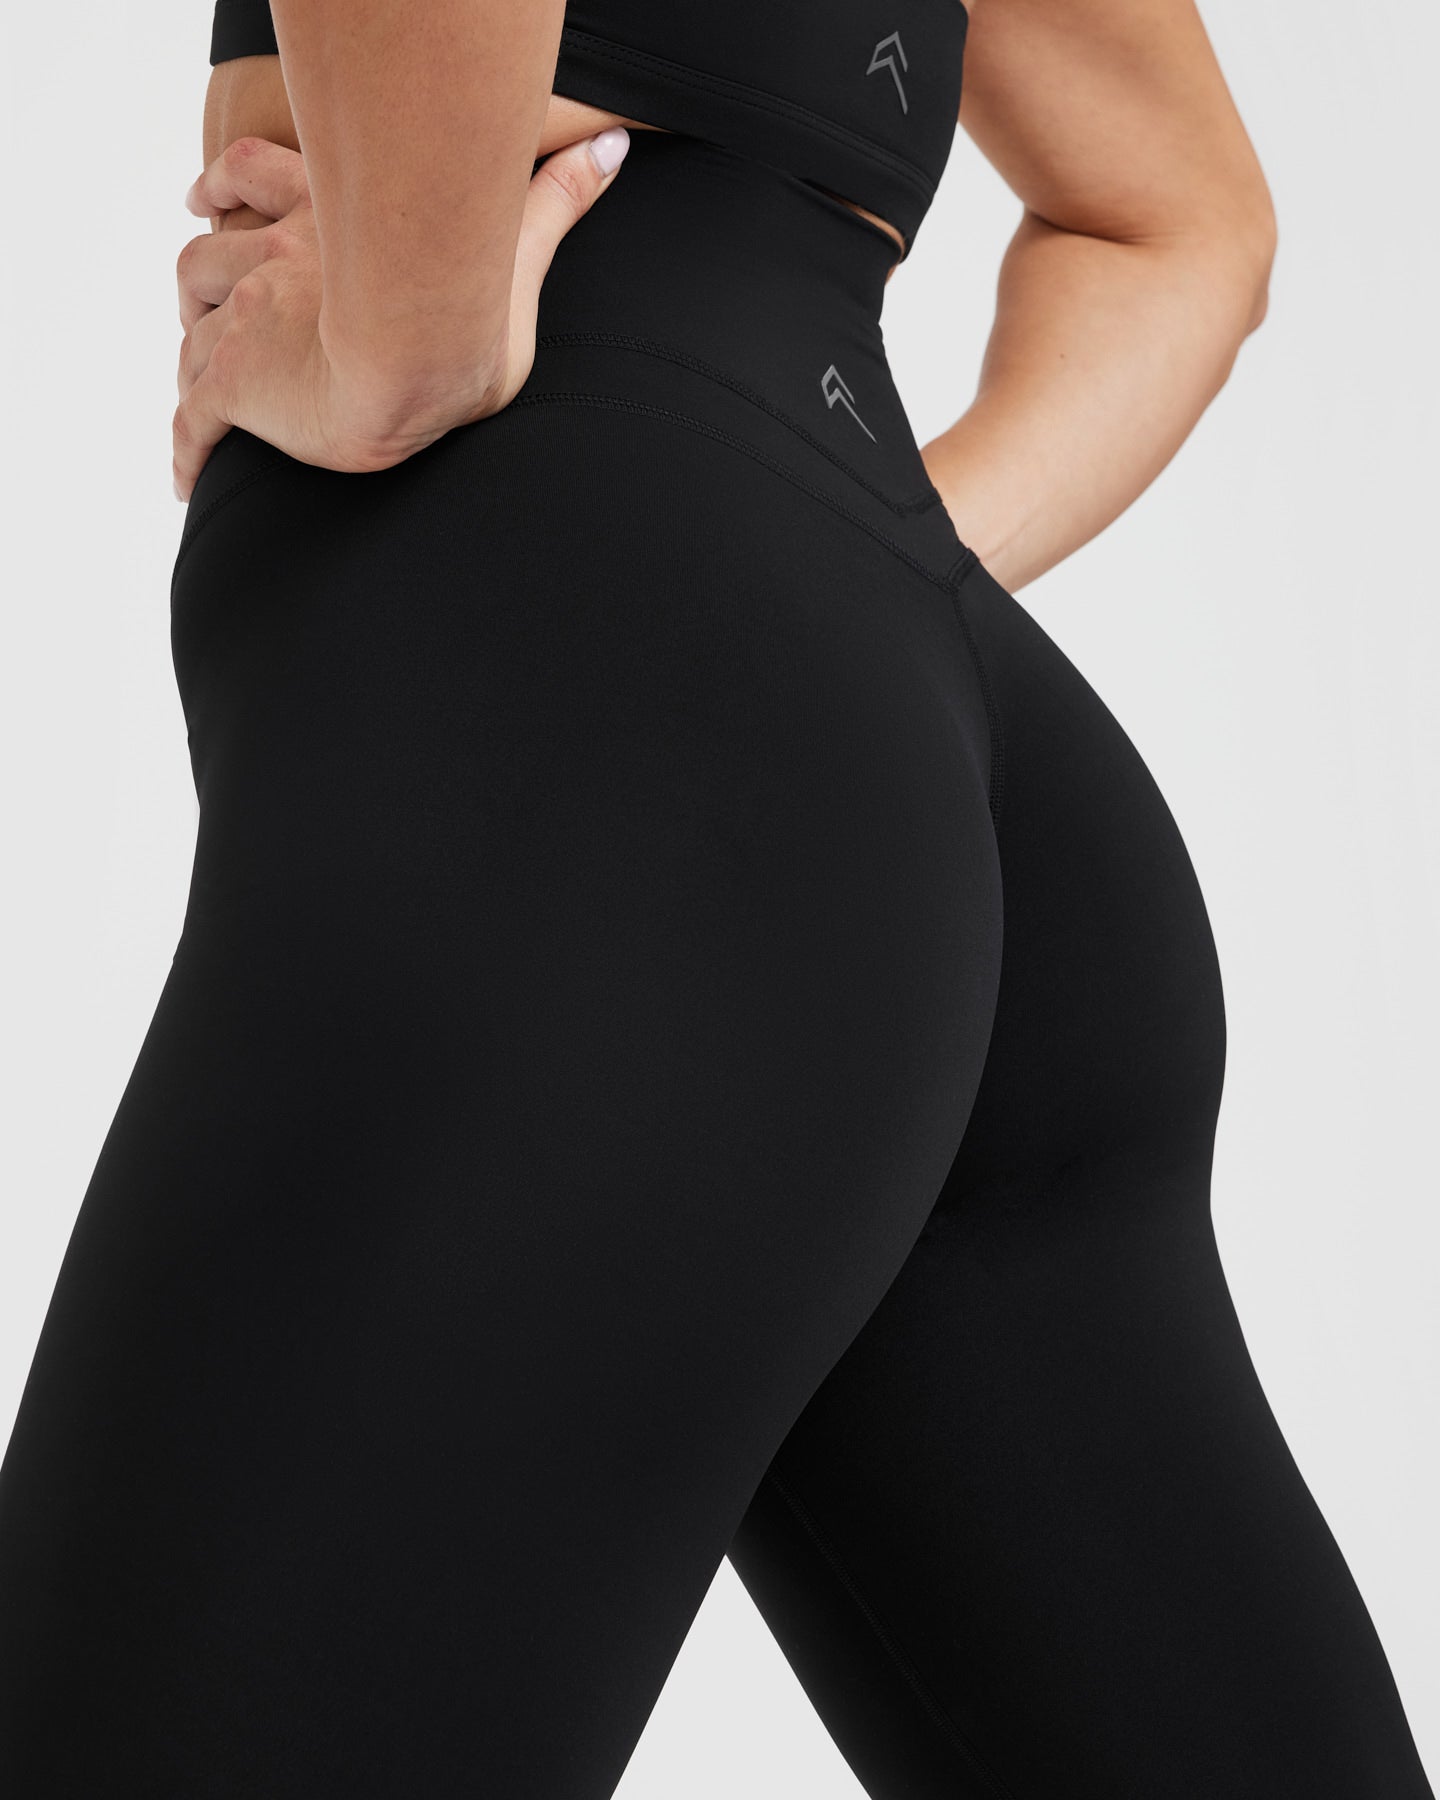 High Waisted Gym Tights Black with Sexy Asian Fusion Inserts - Fit Curves